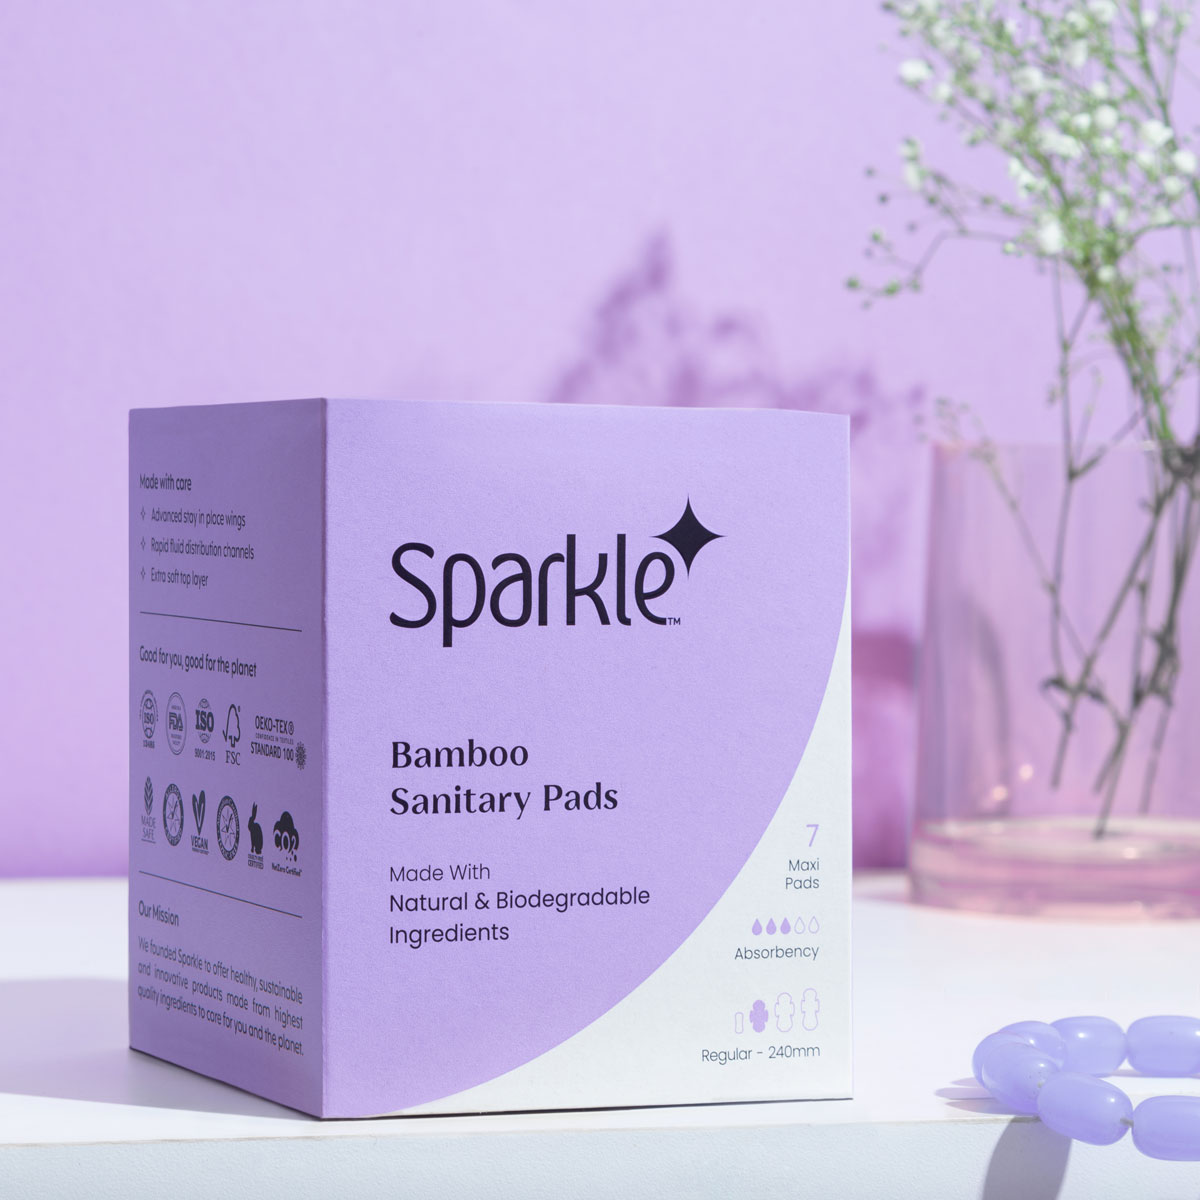 Sparkle-Bamboo-Sanitary-Pads